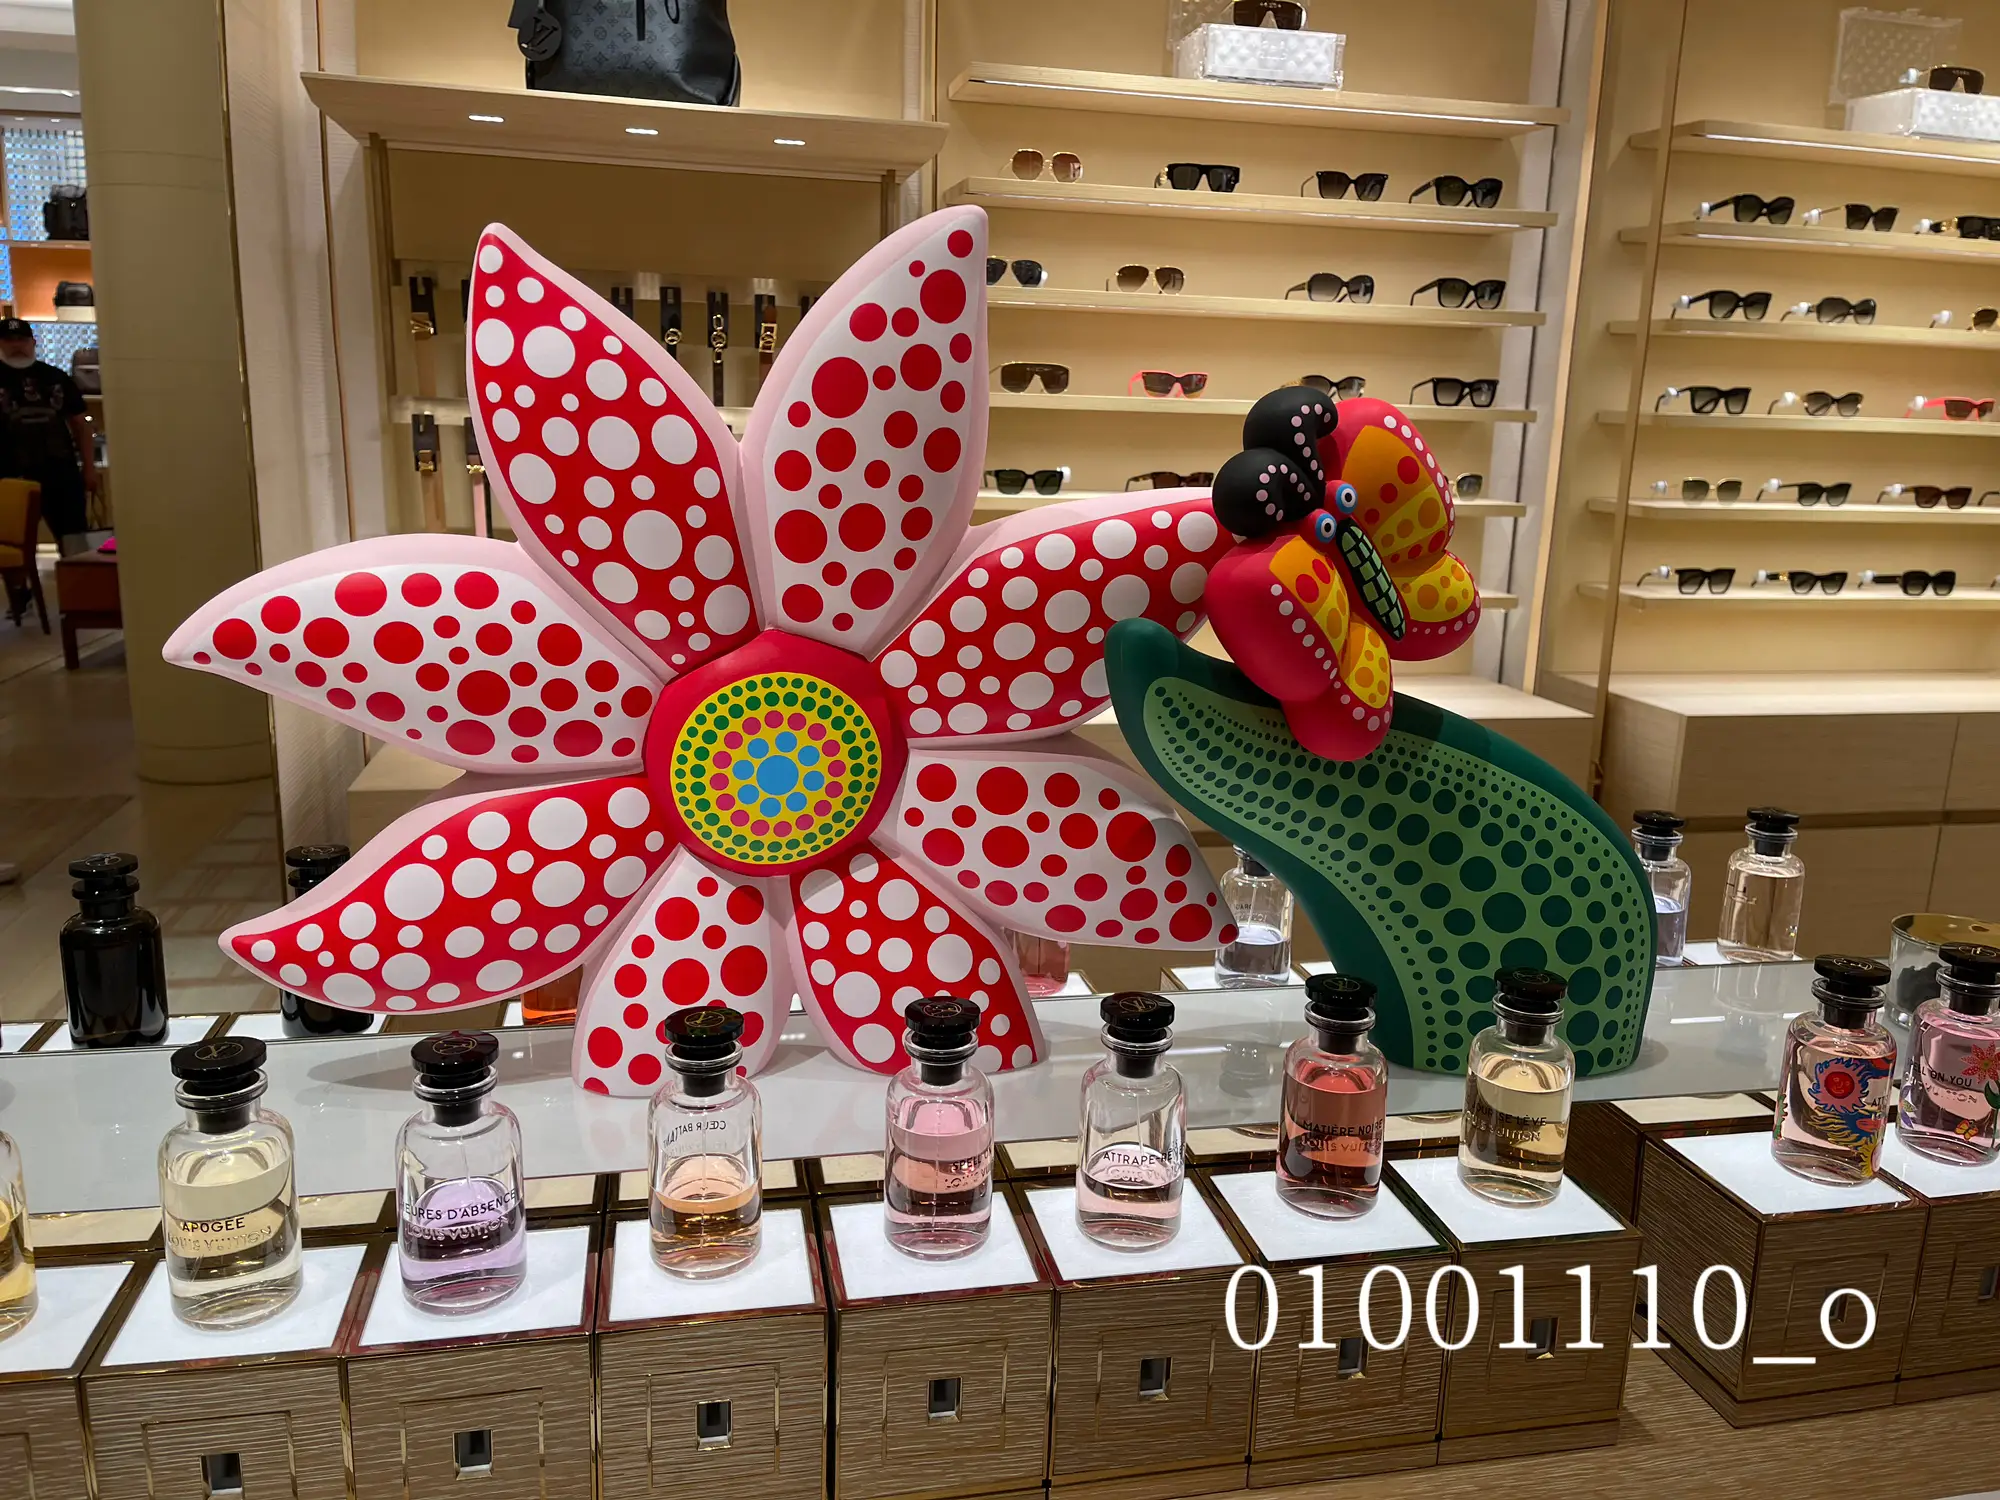 Louis Vuitton perfume! Love the flowers, Gallery posted by 01001110_o